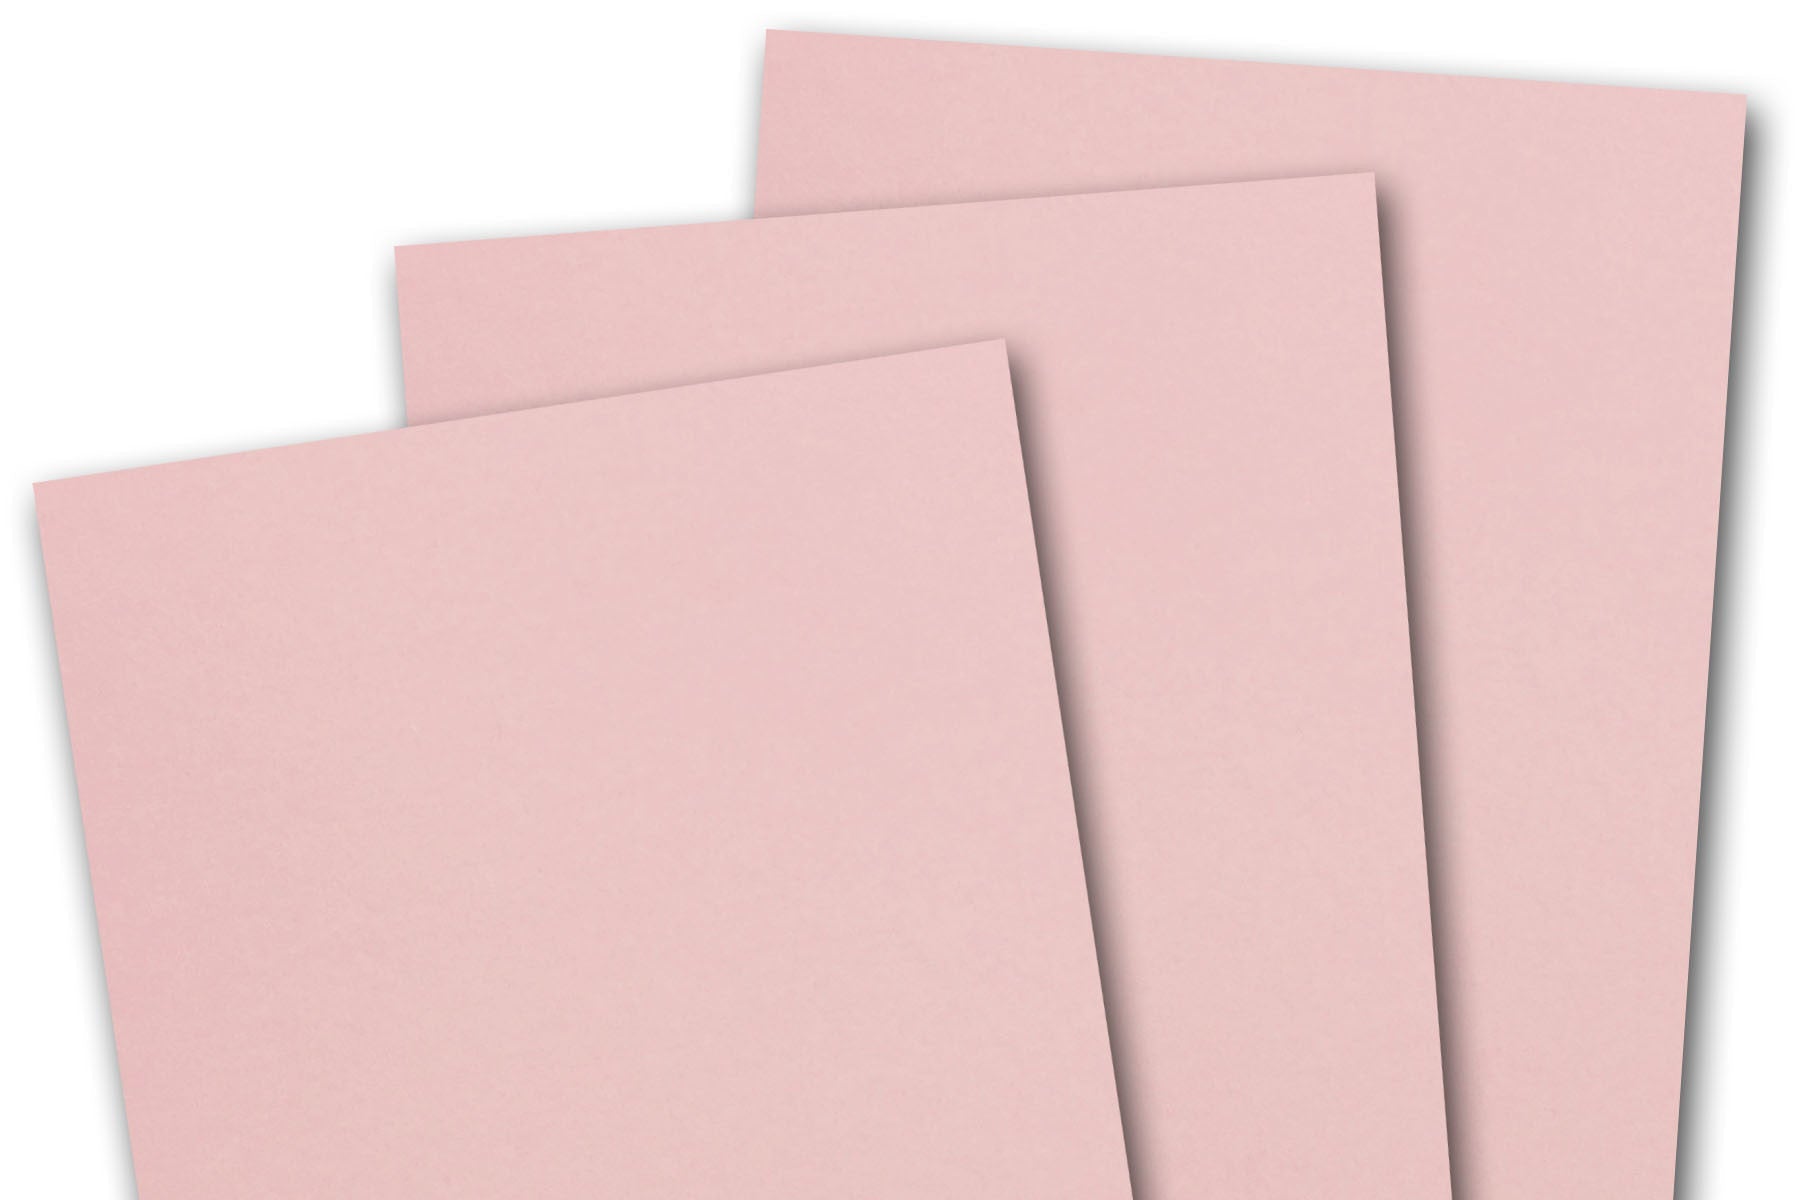 Twavang 25 Sheets Fuchsia Pink Cardstock Paper 8.5'' x 11'', 250gsm/92lb  Thick Paper for Scrapbook, Invitations, Printing and DIY Cards